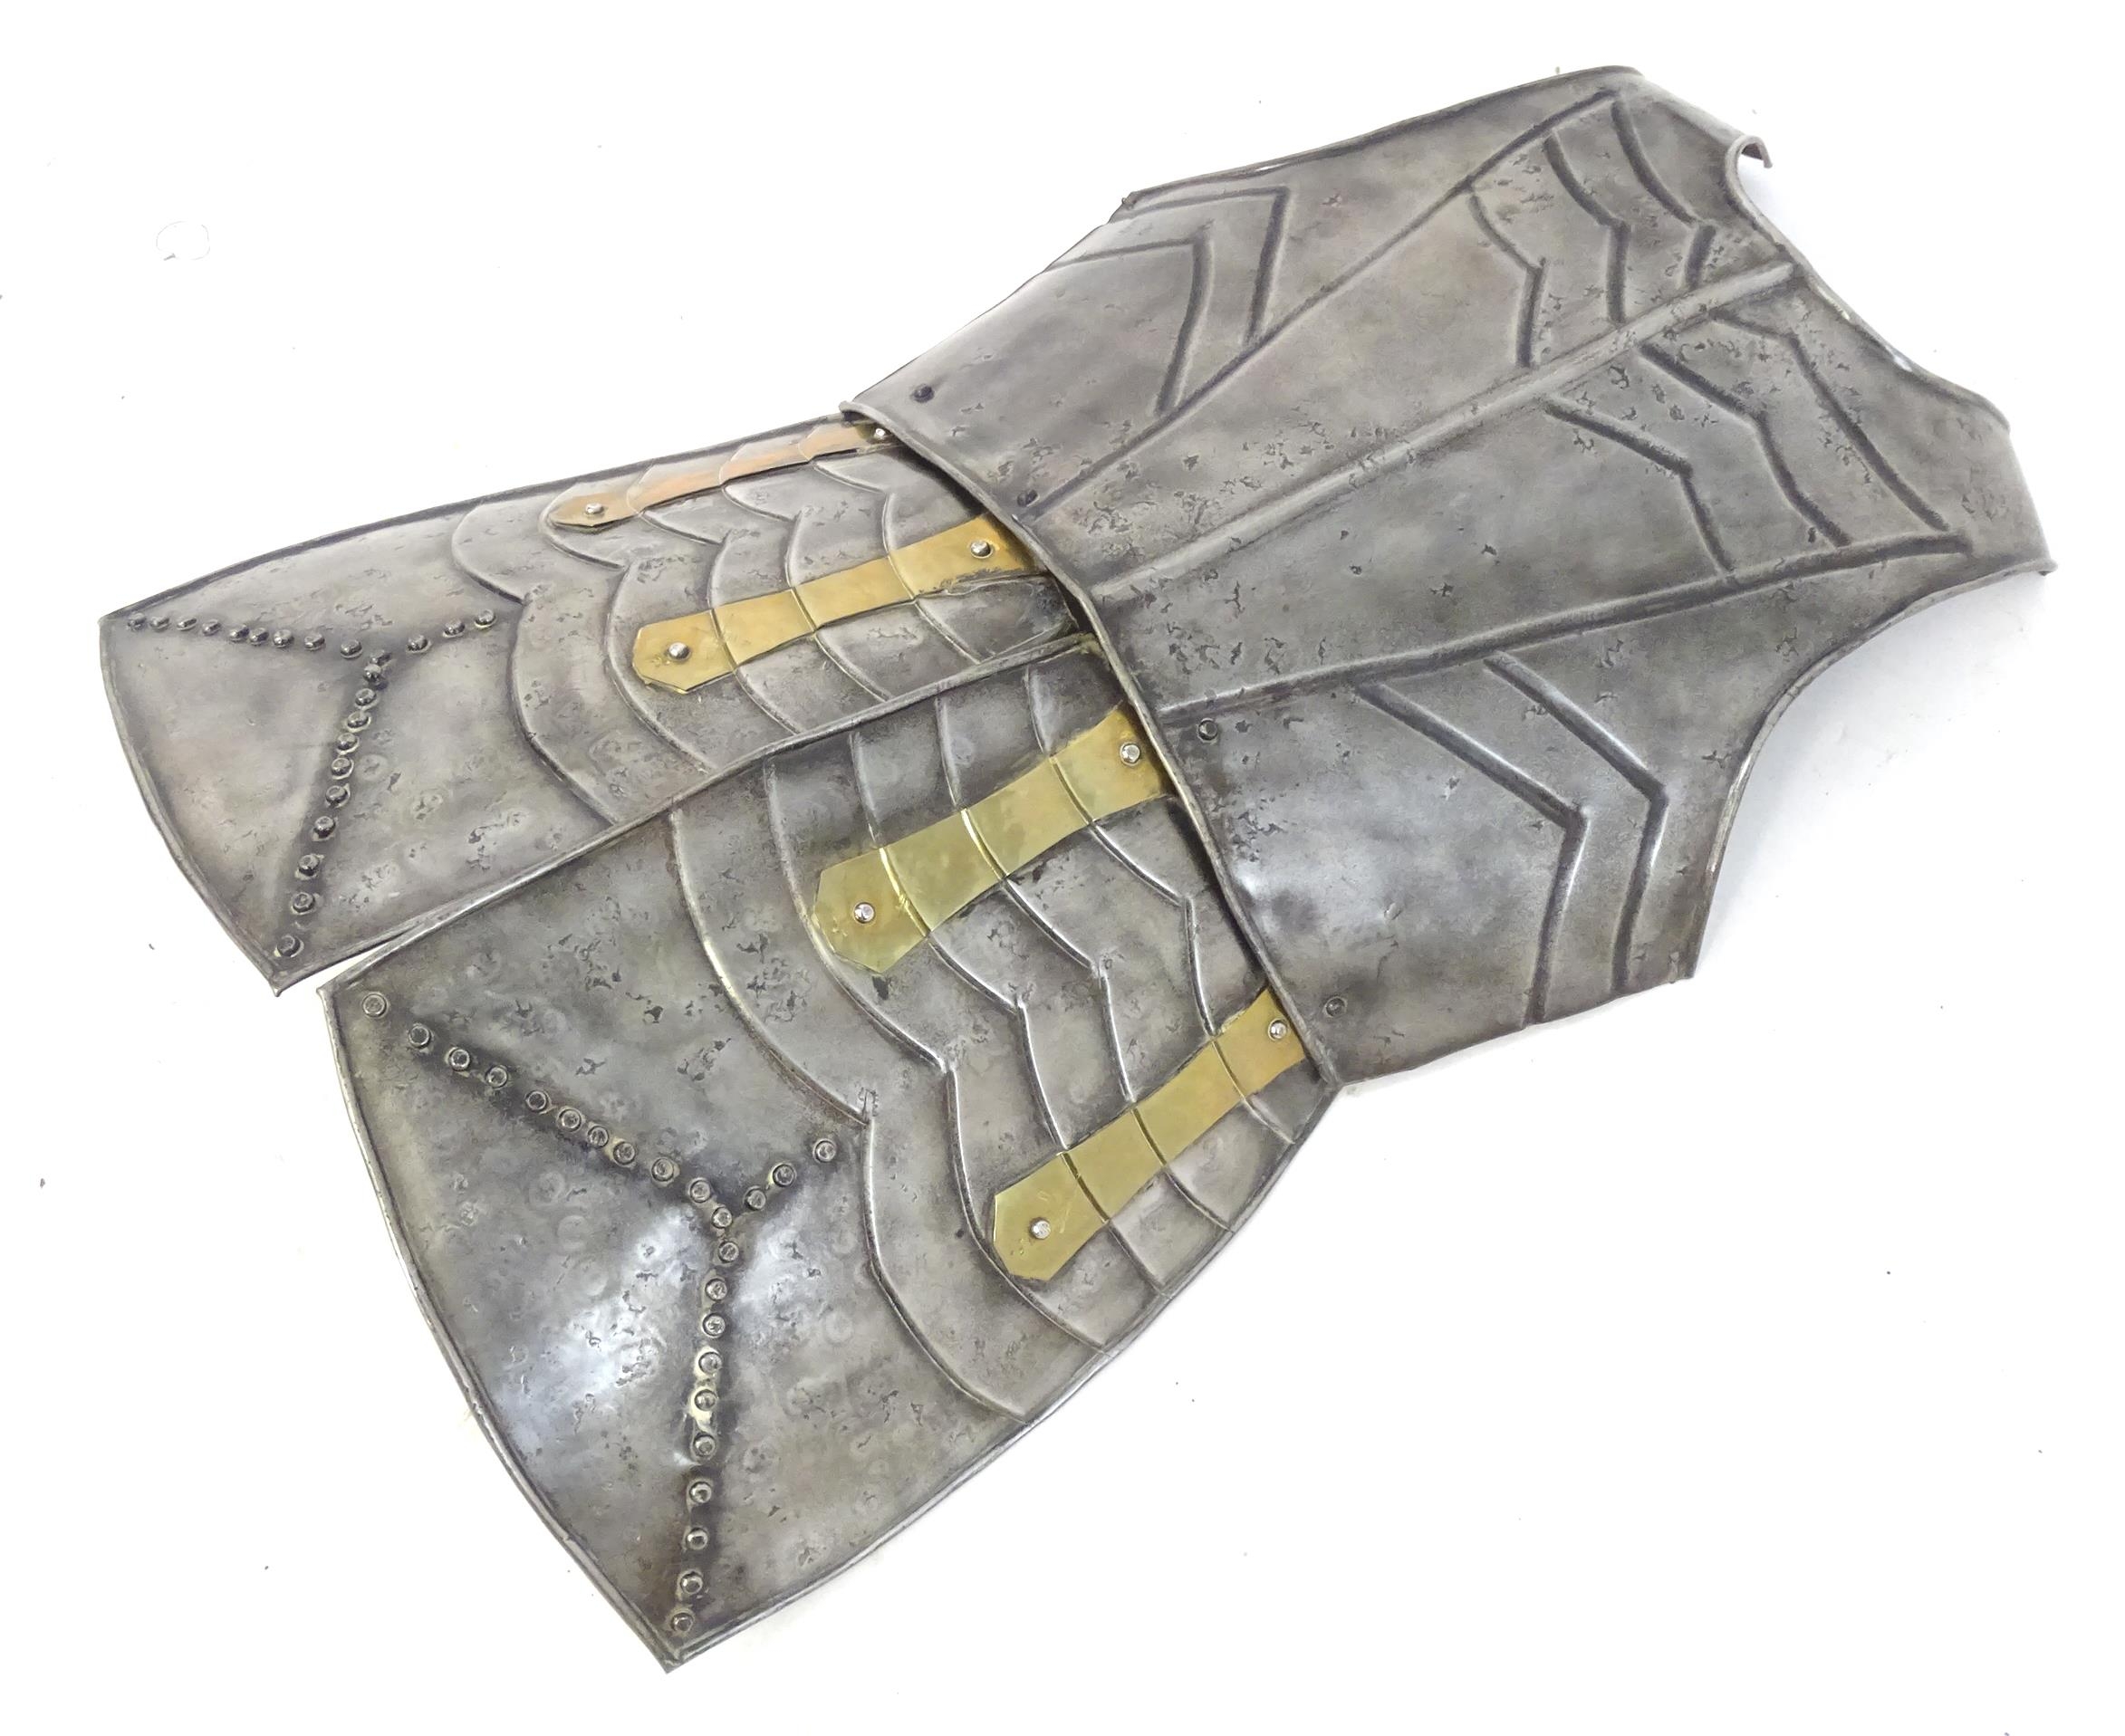 Militaria: 20thC medieval style display armour, comprising breastplate and tasset, constructed - Image 8 of 8